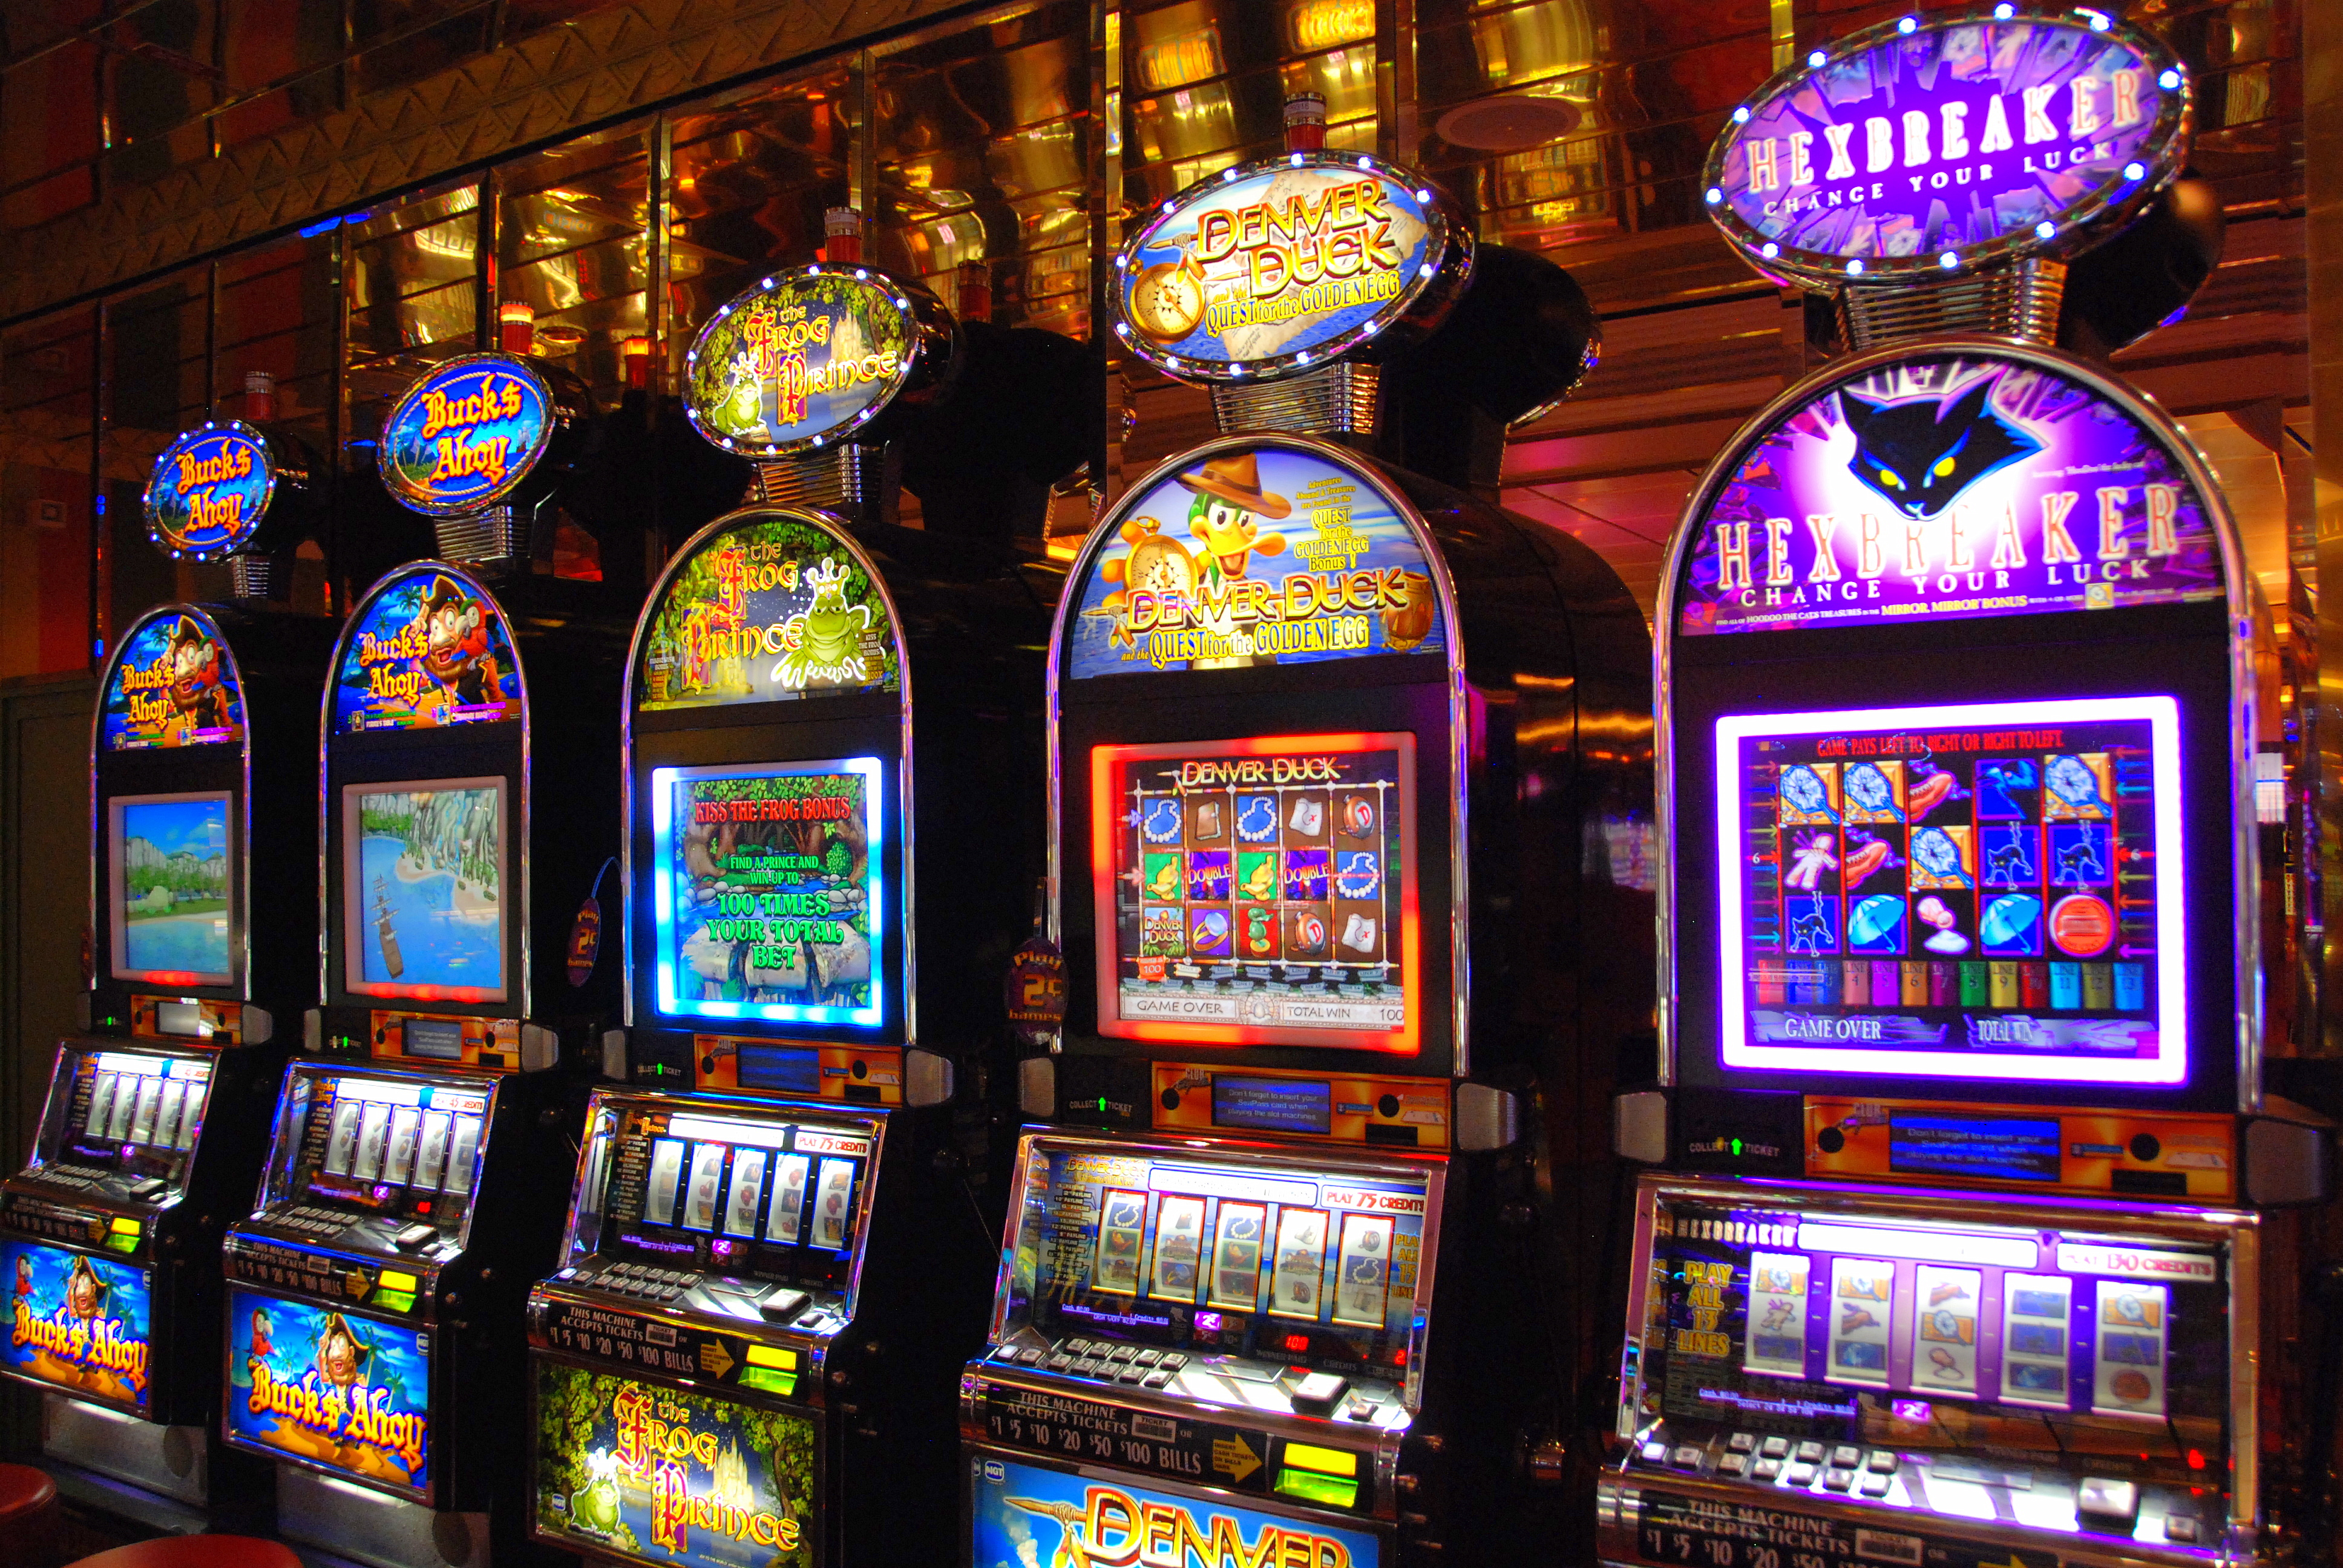 For starters, slot games can differ considerably in their number of reels, the number of paylines, bonus features, and game mechanics (e.g.pays one way or pays both ways), which means that you may feel unsure which ones offer you better odds of winning online slots than others.